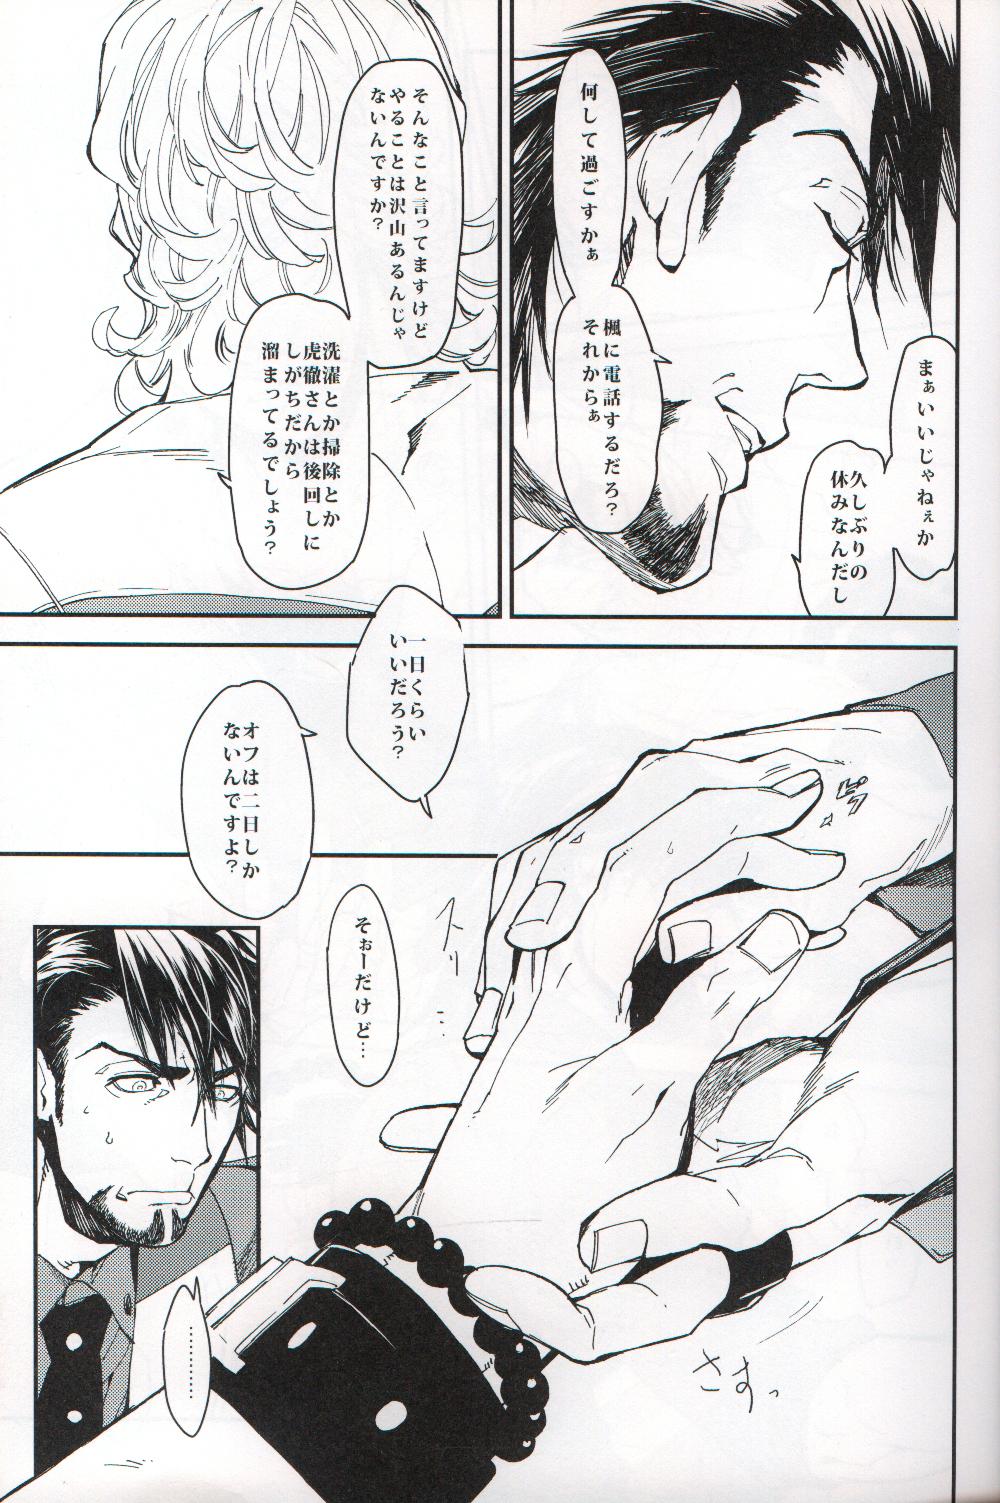 Ngentot filmy - Tiger and bunny Gozando - Page 10